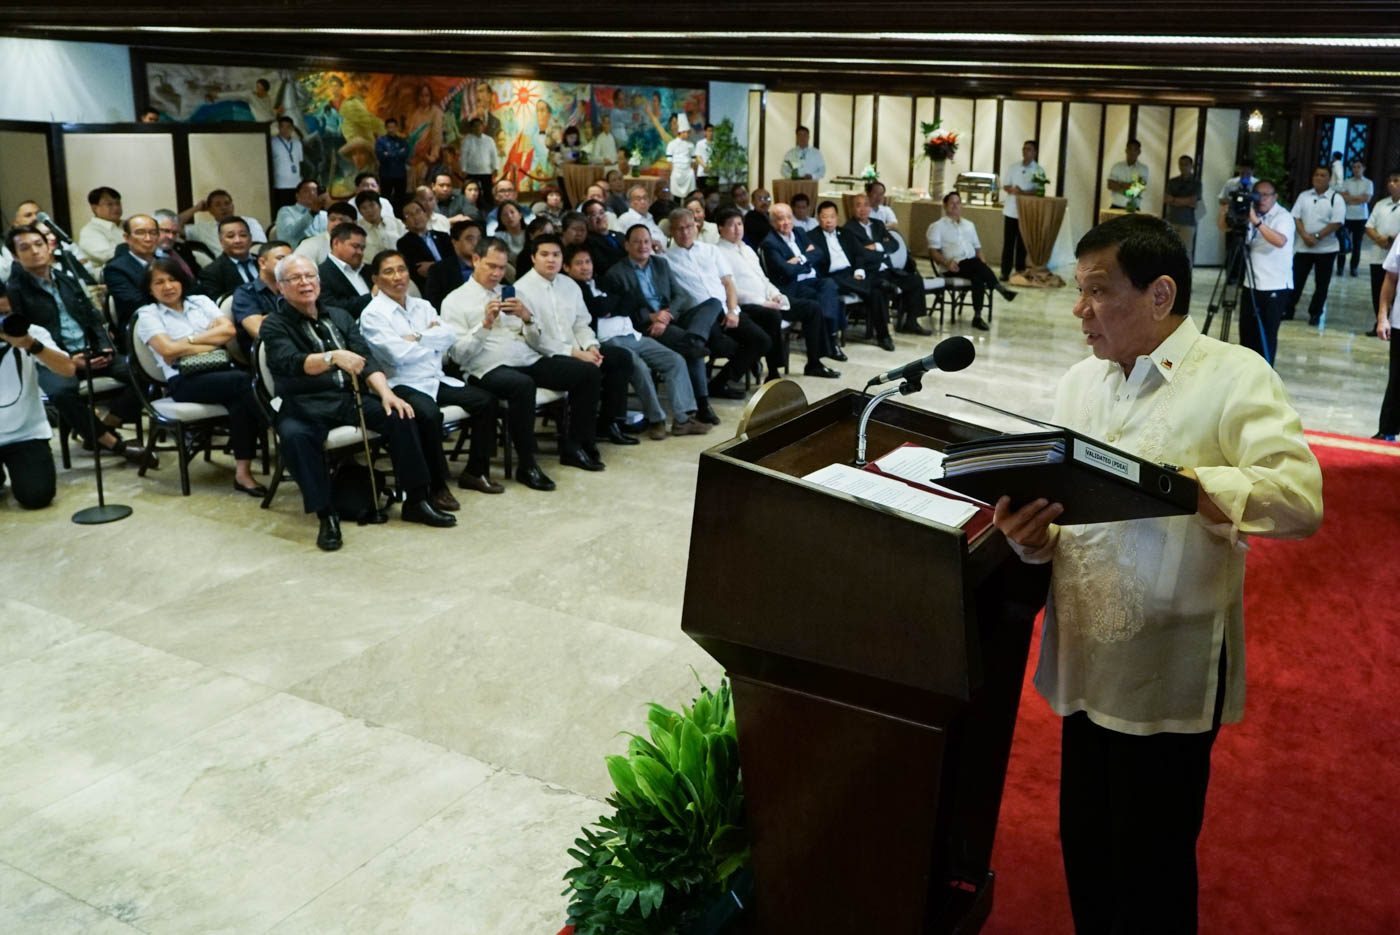 IN PHOTOS: Duterte meets miners in Malacañang